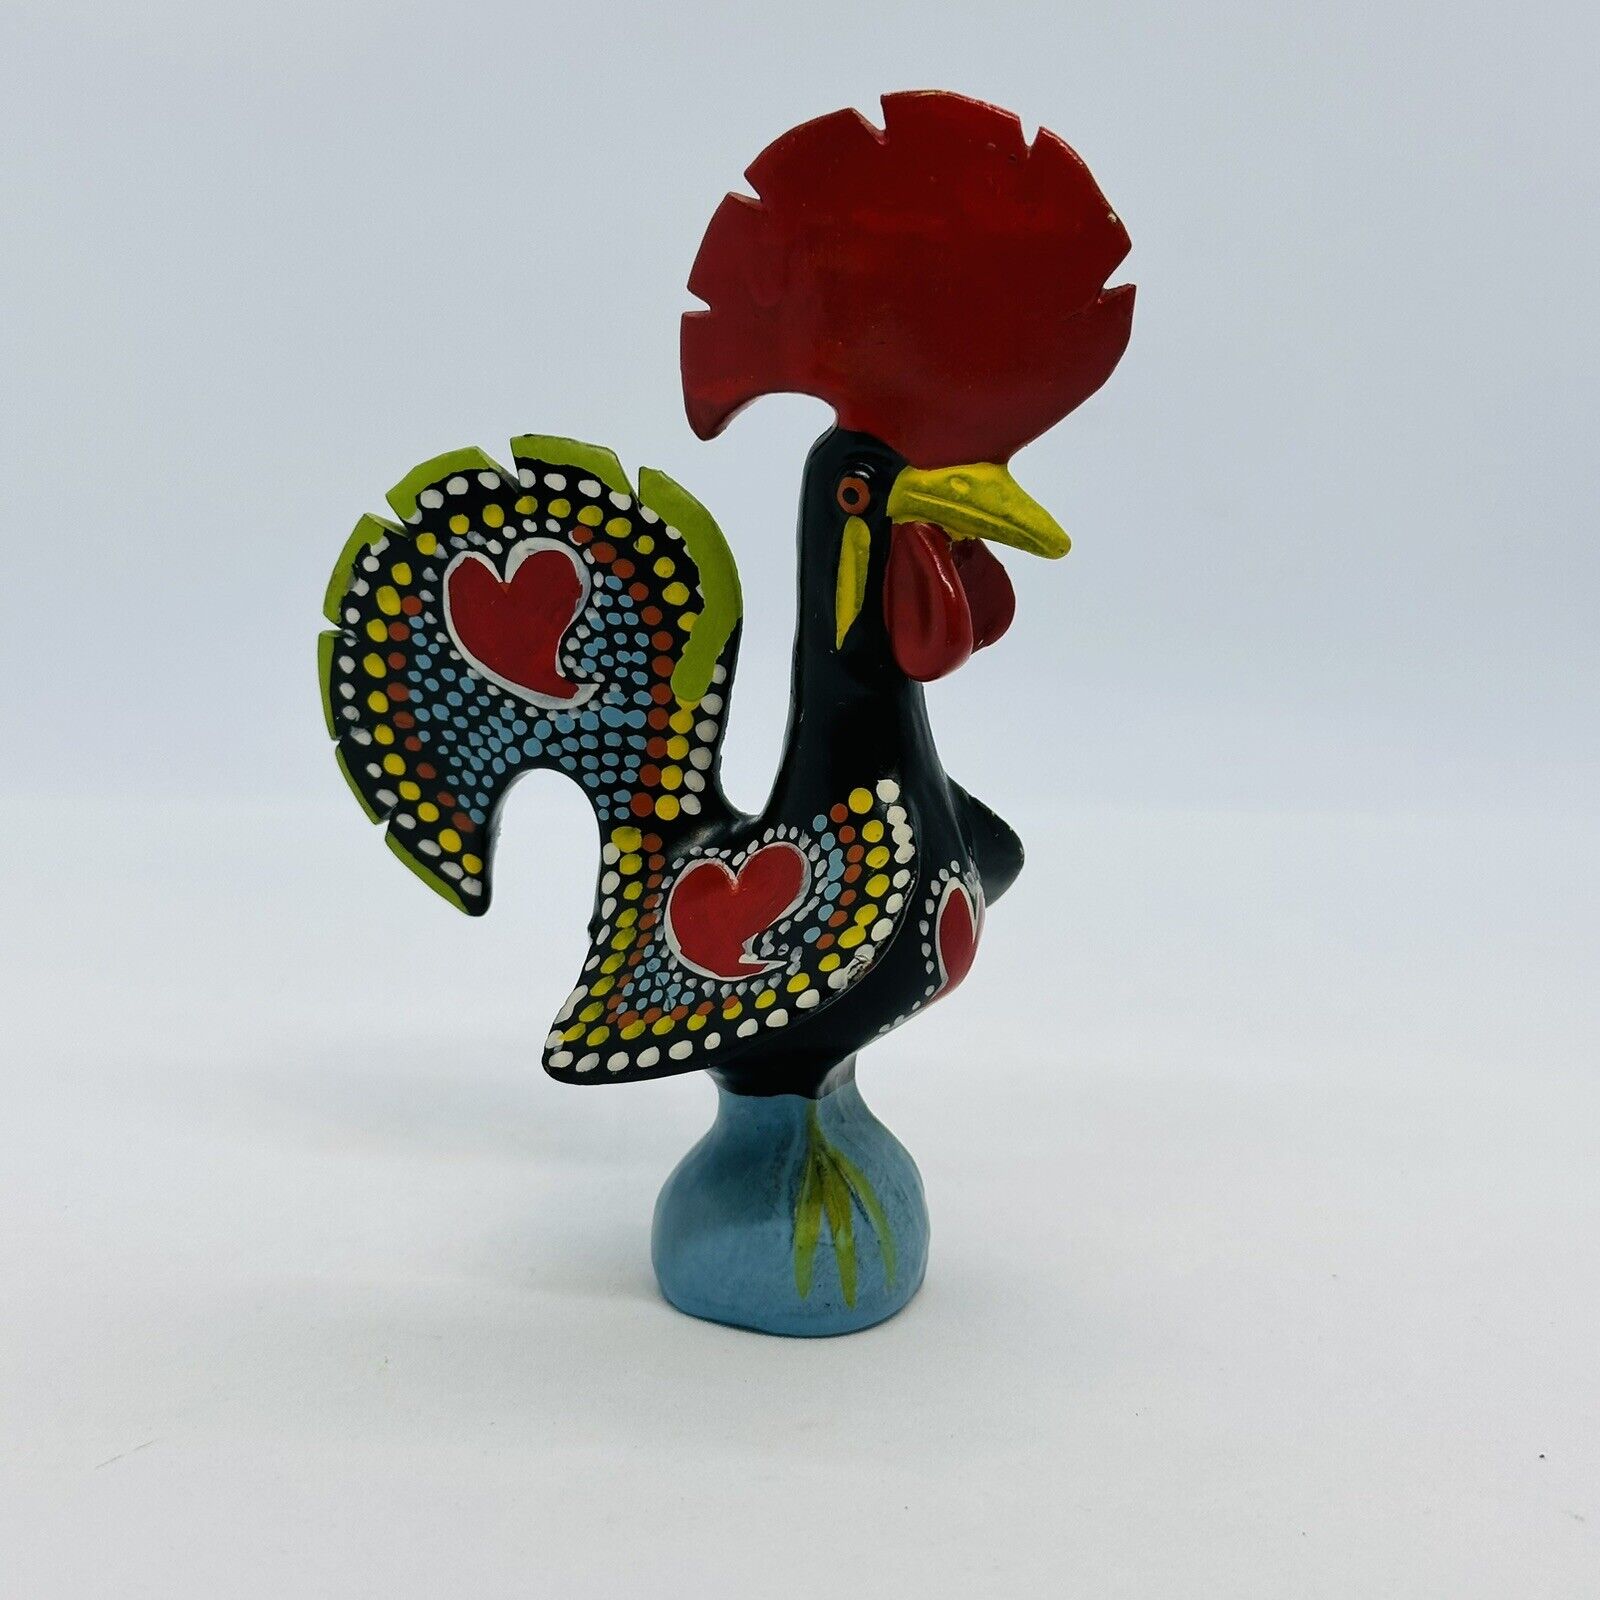 Portugal Barcelos Rooster Figurine Good Luck Hand Painted Folk Art Ceramic 4.5”